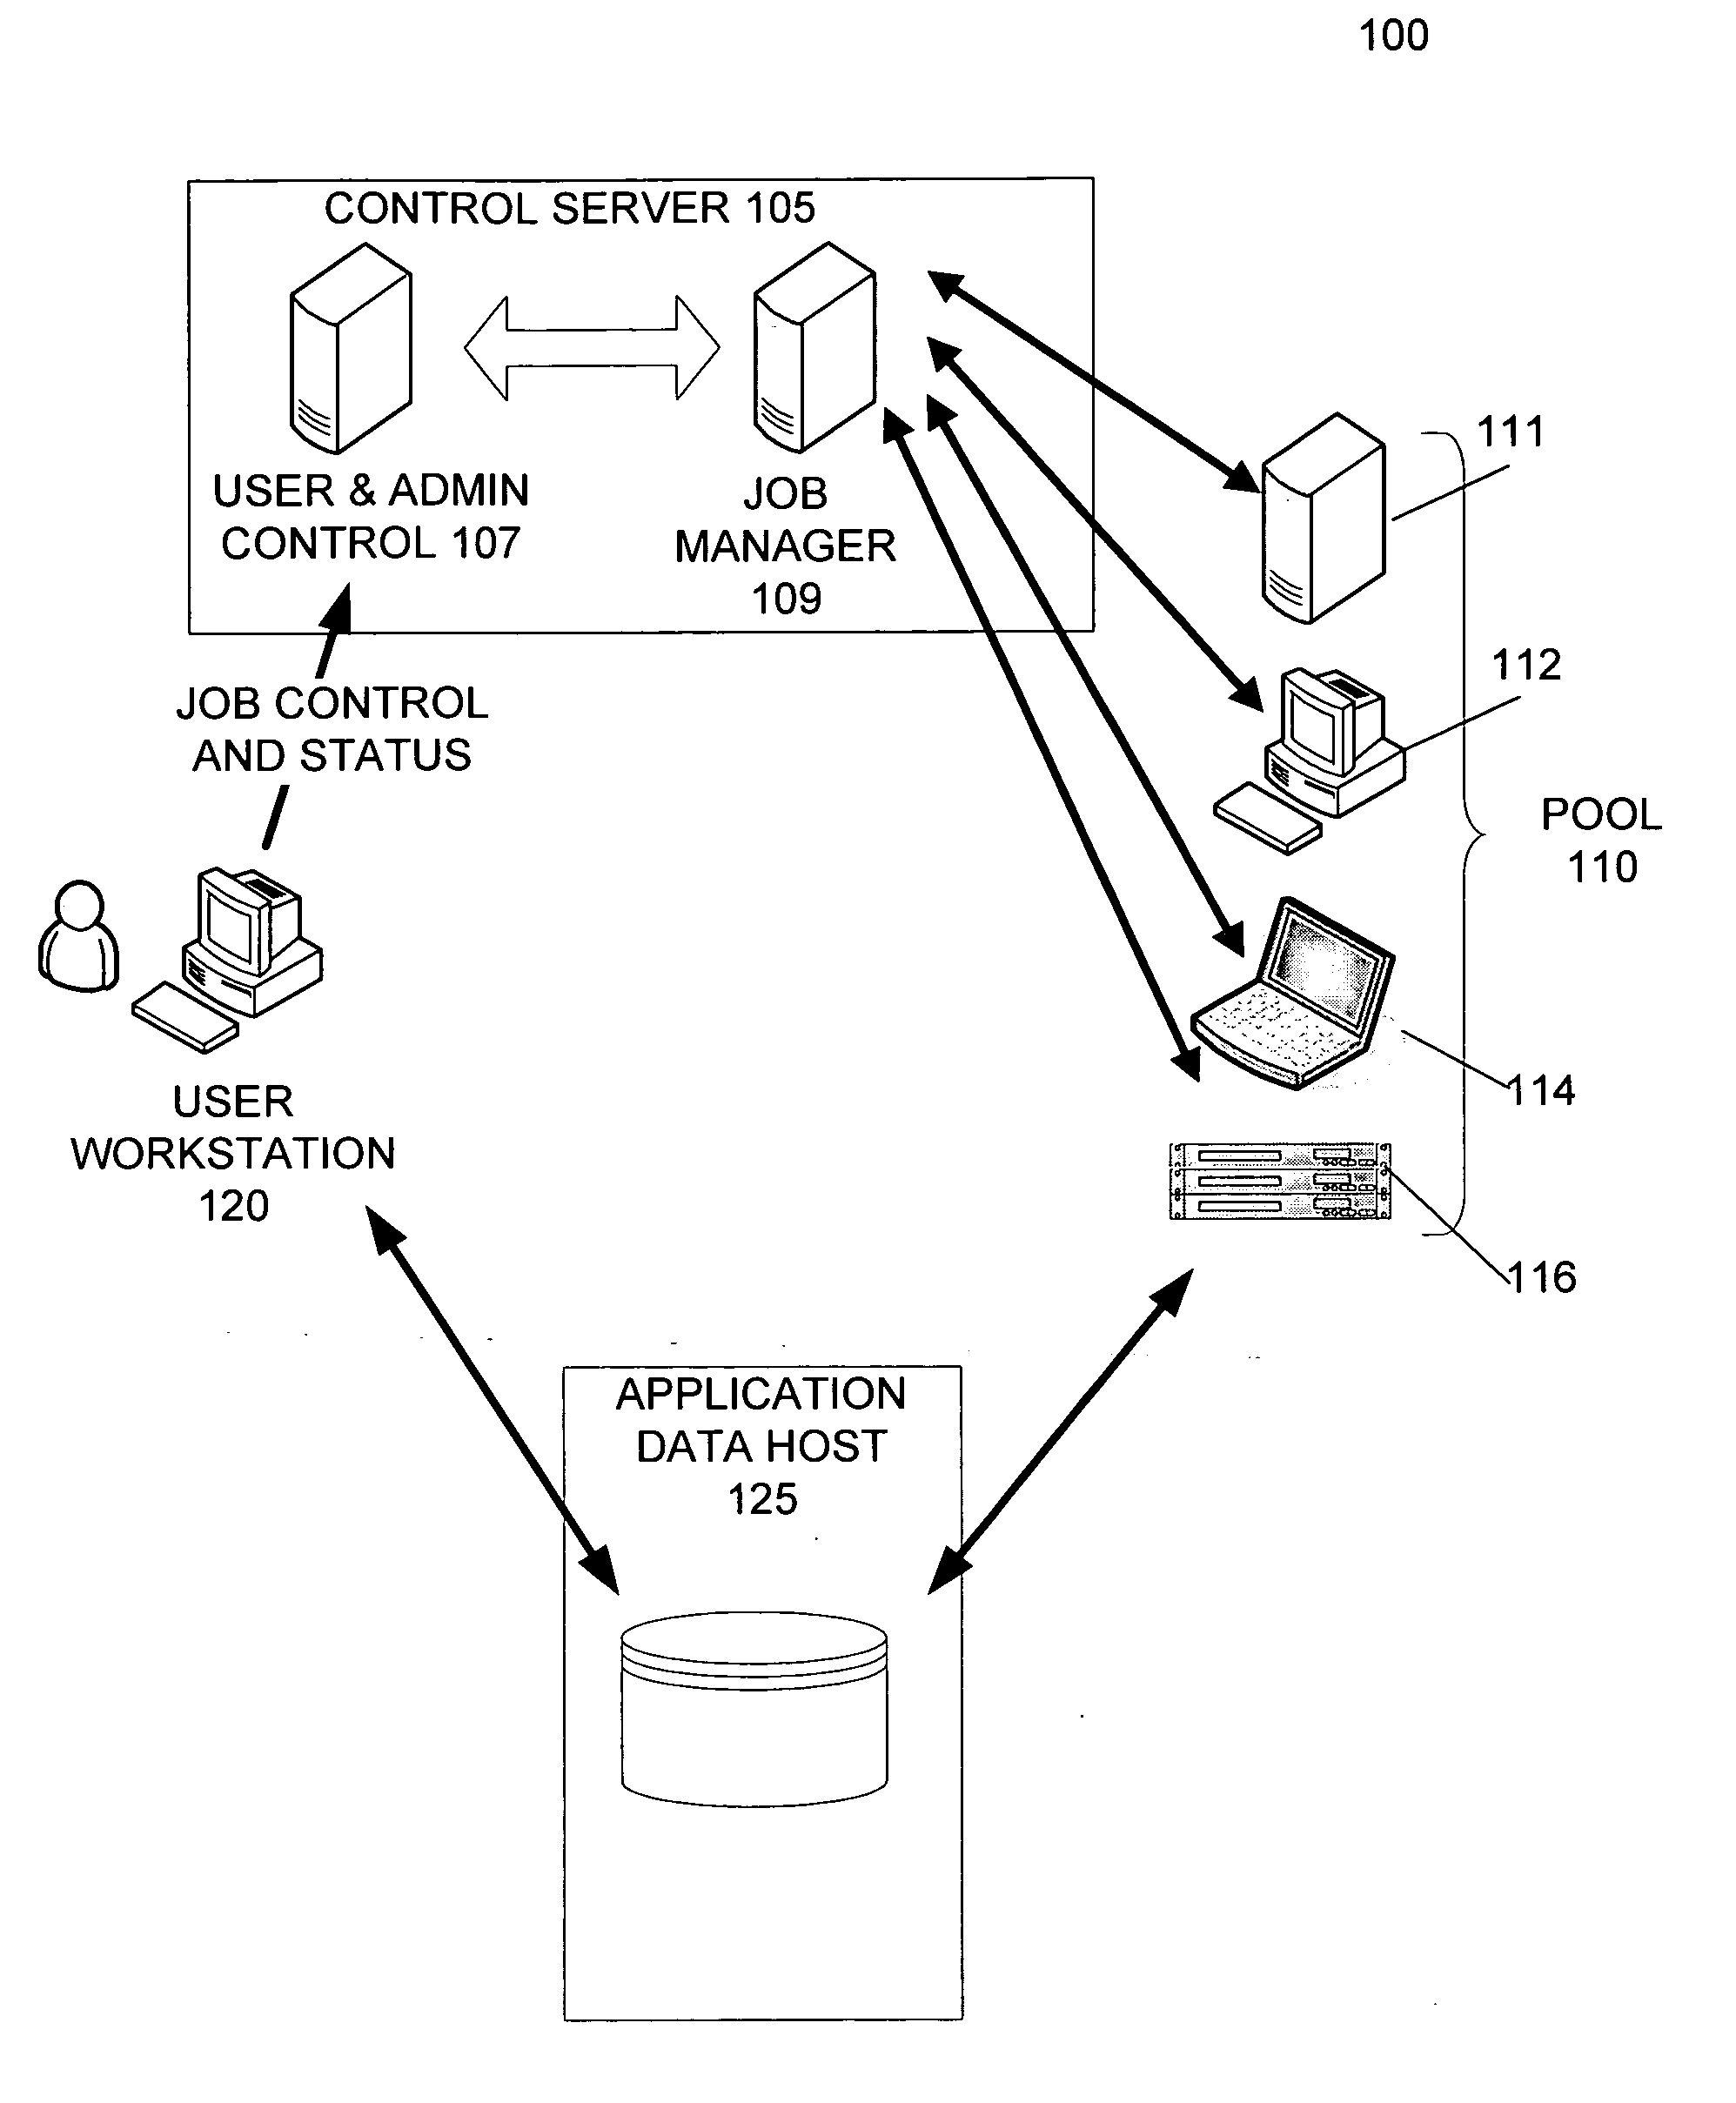 Distributed object execution system